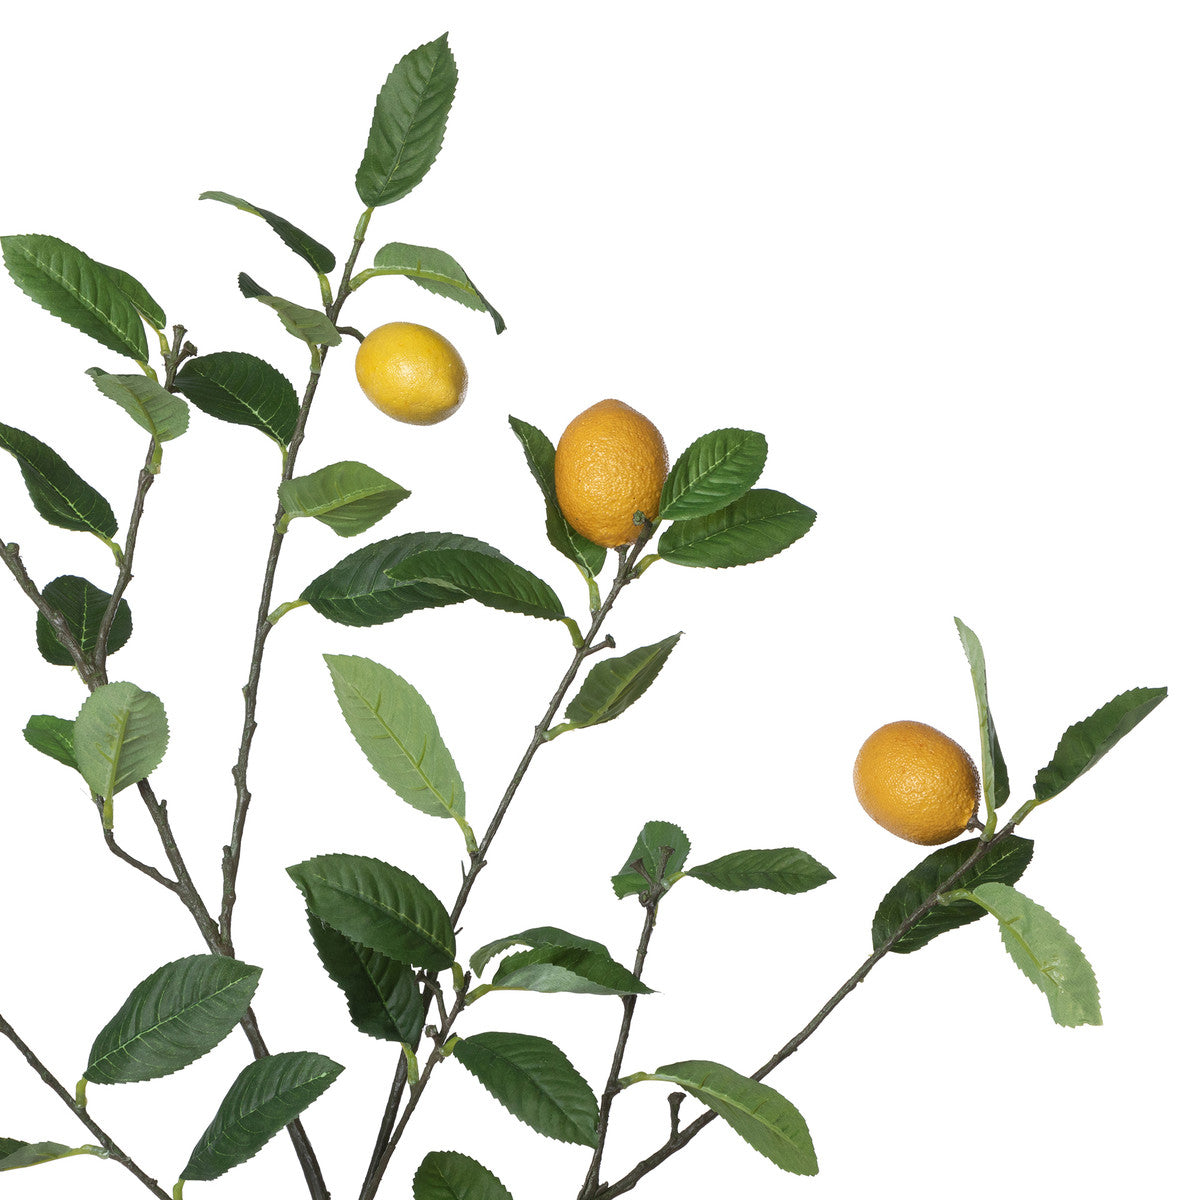 faux artificial yellow lemons with green leaves on white background